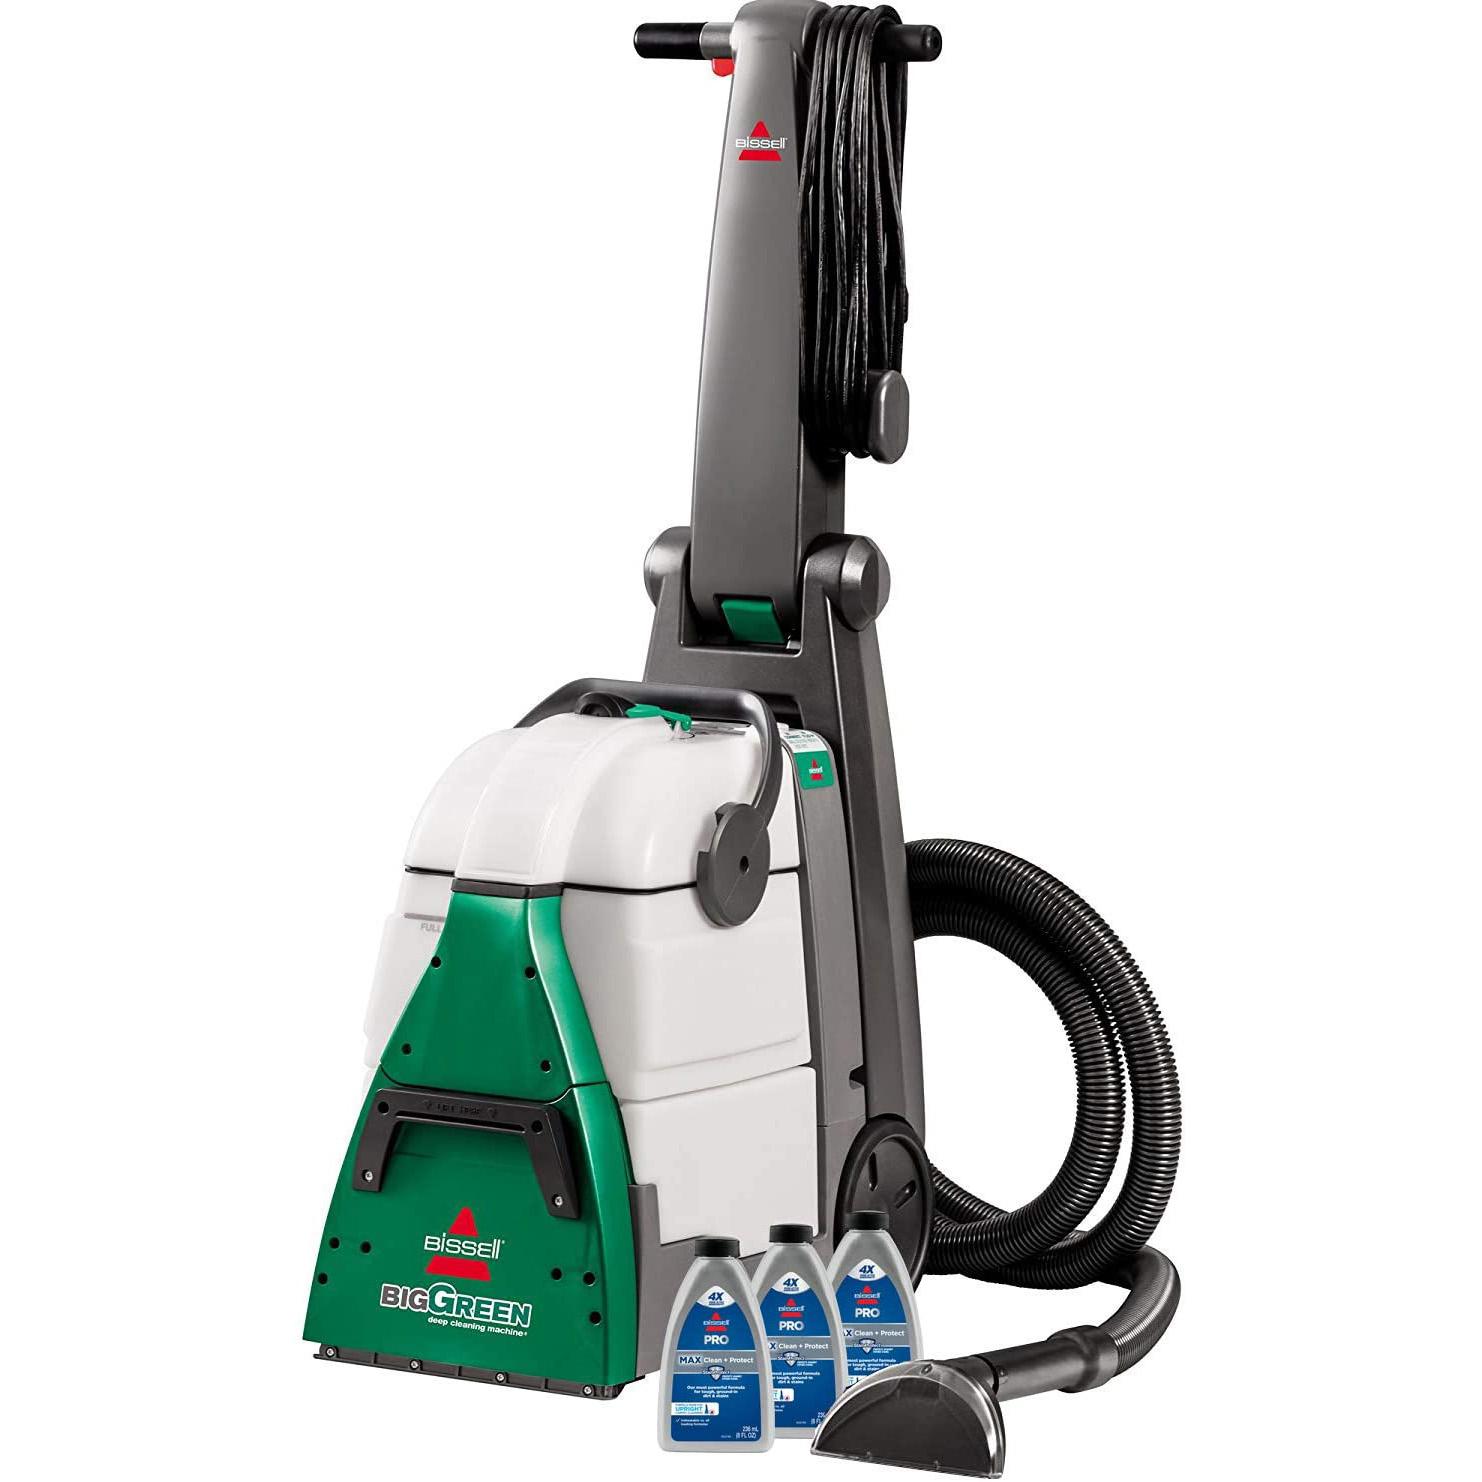 Bissell Big Green Professional Carpet Cleaner Machine for $299.99 Shipped